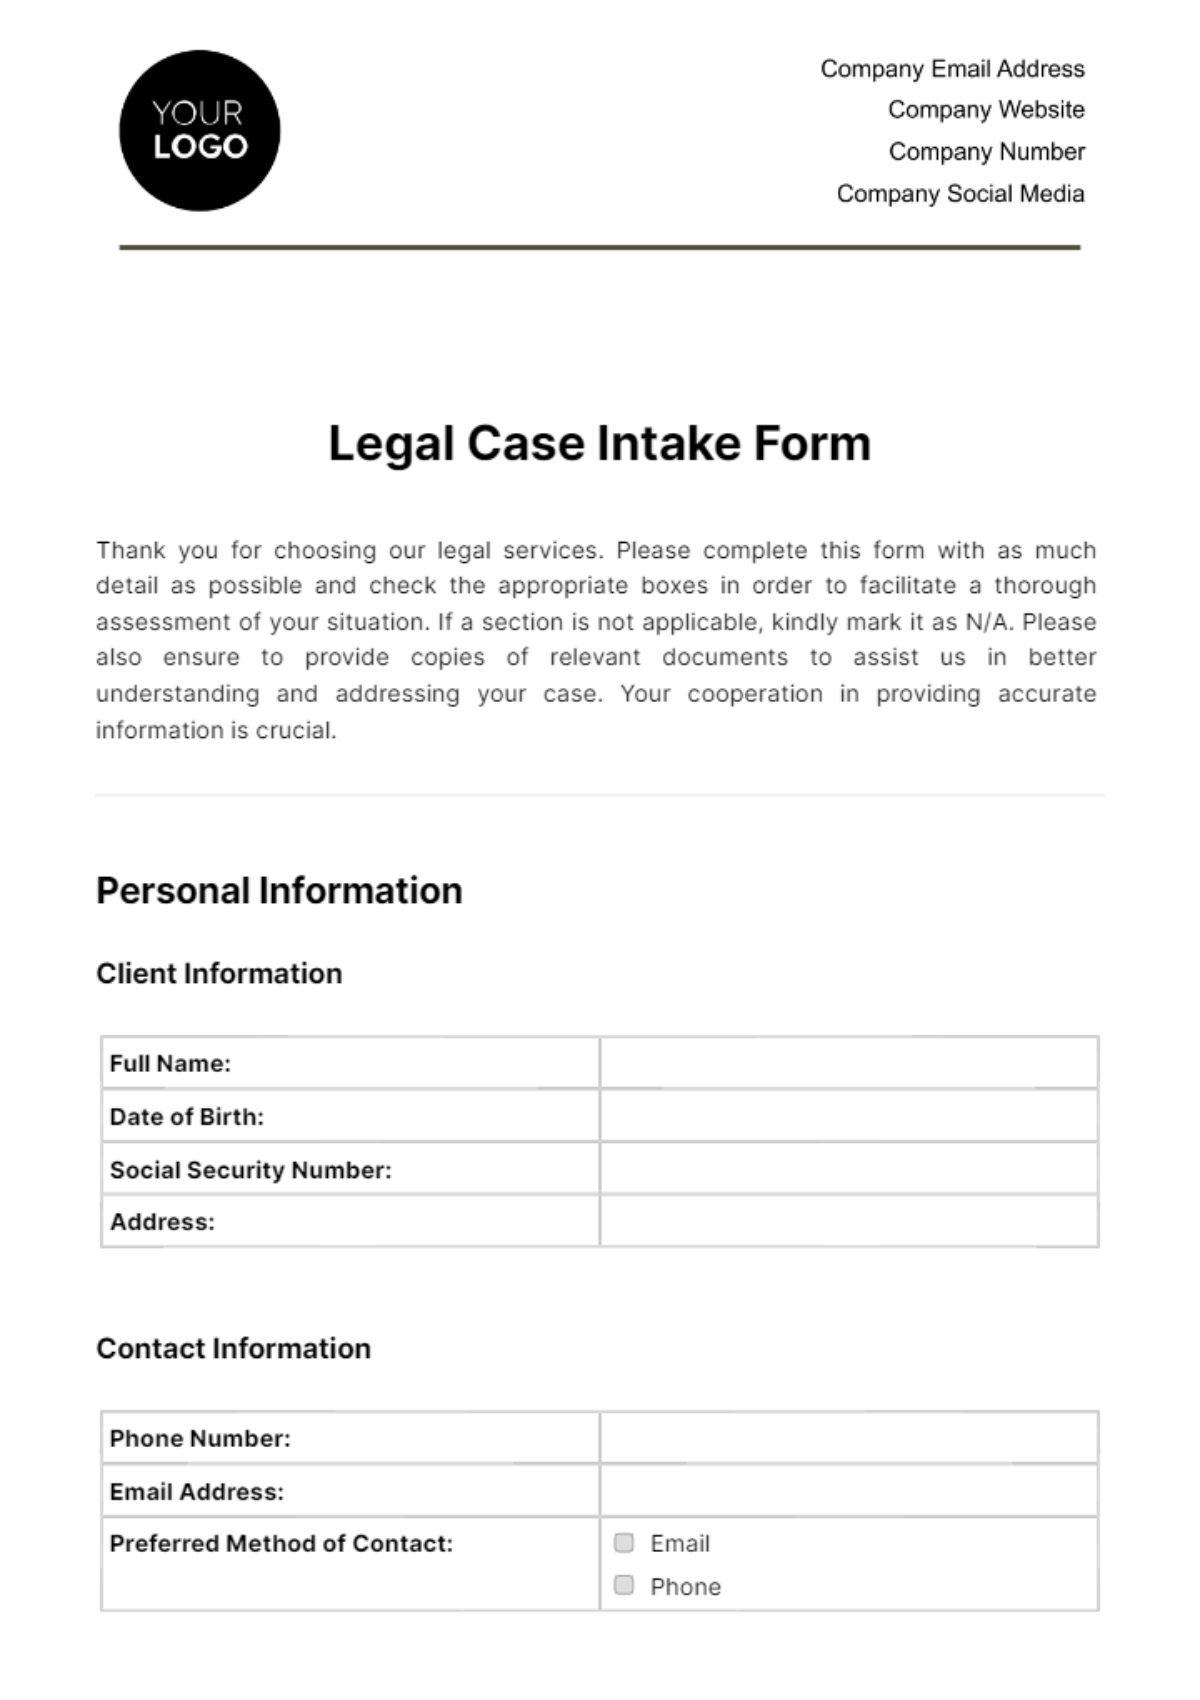 Legal Case Intake Form Template